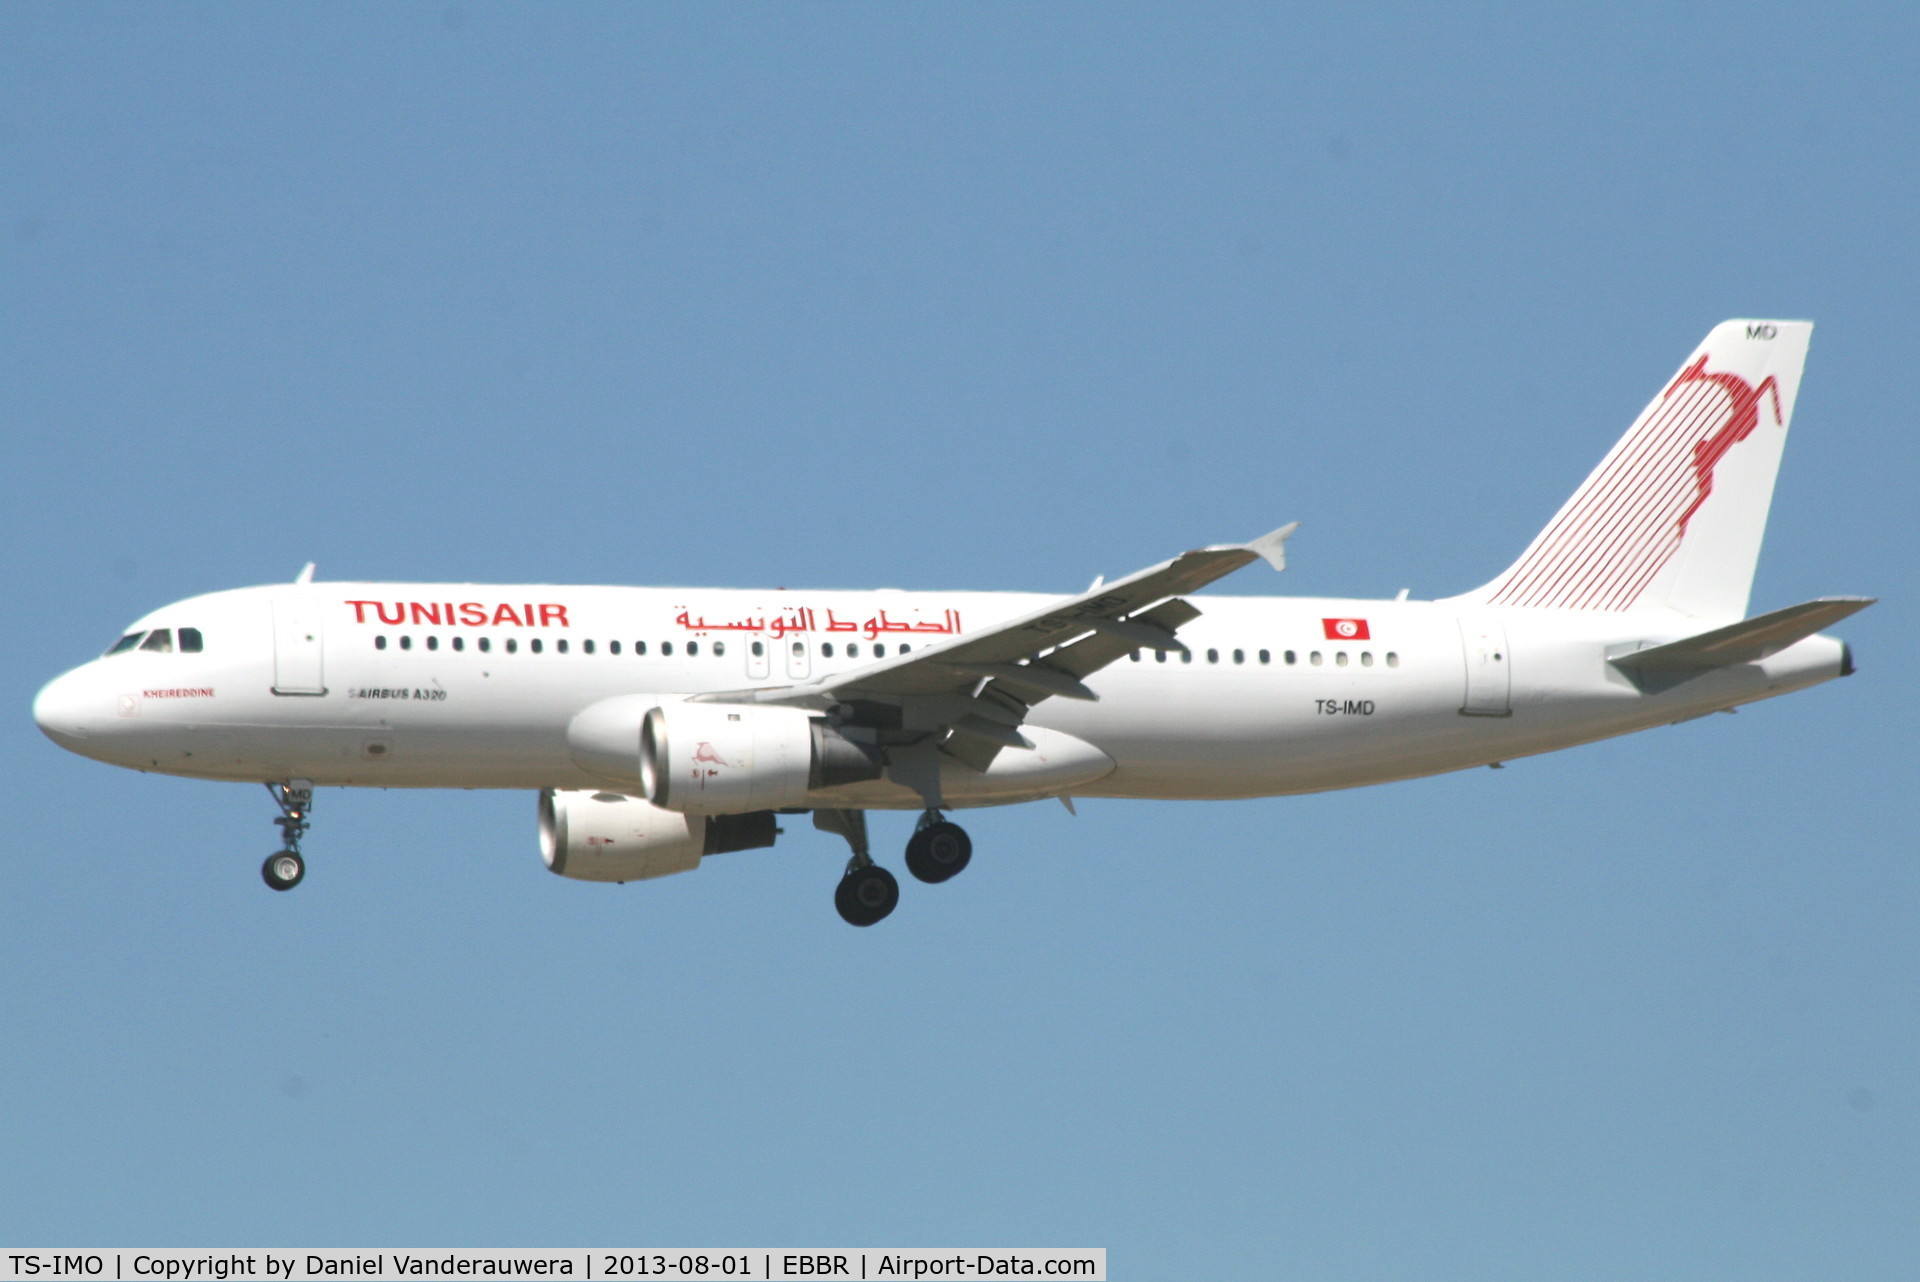 TS-IMO, 2001 Airbus A319-114 C/N 1479, Flight TU788 is descending to RWY 20